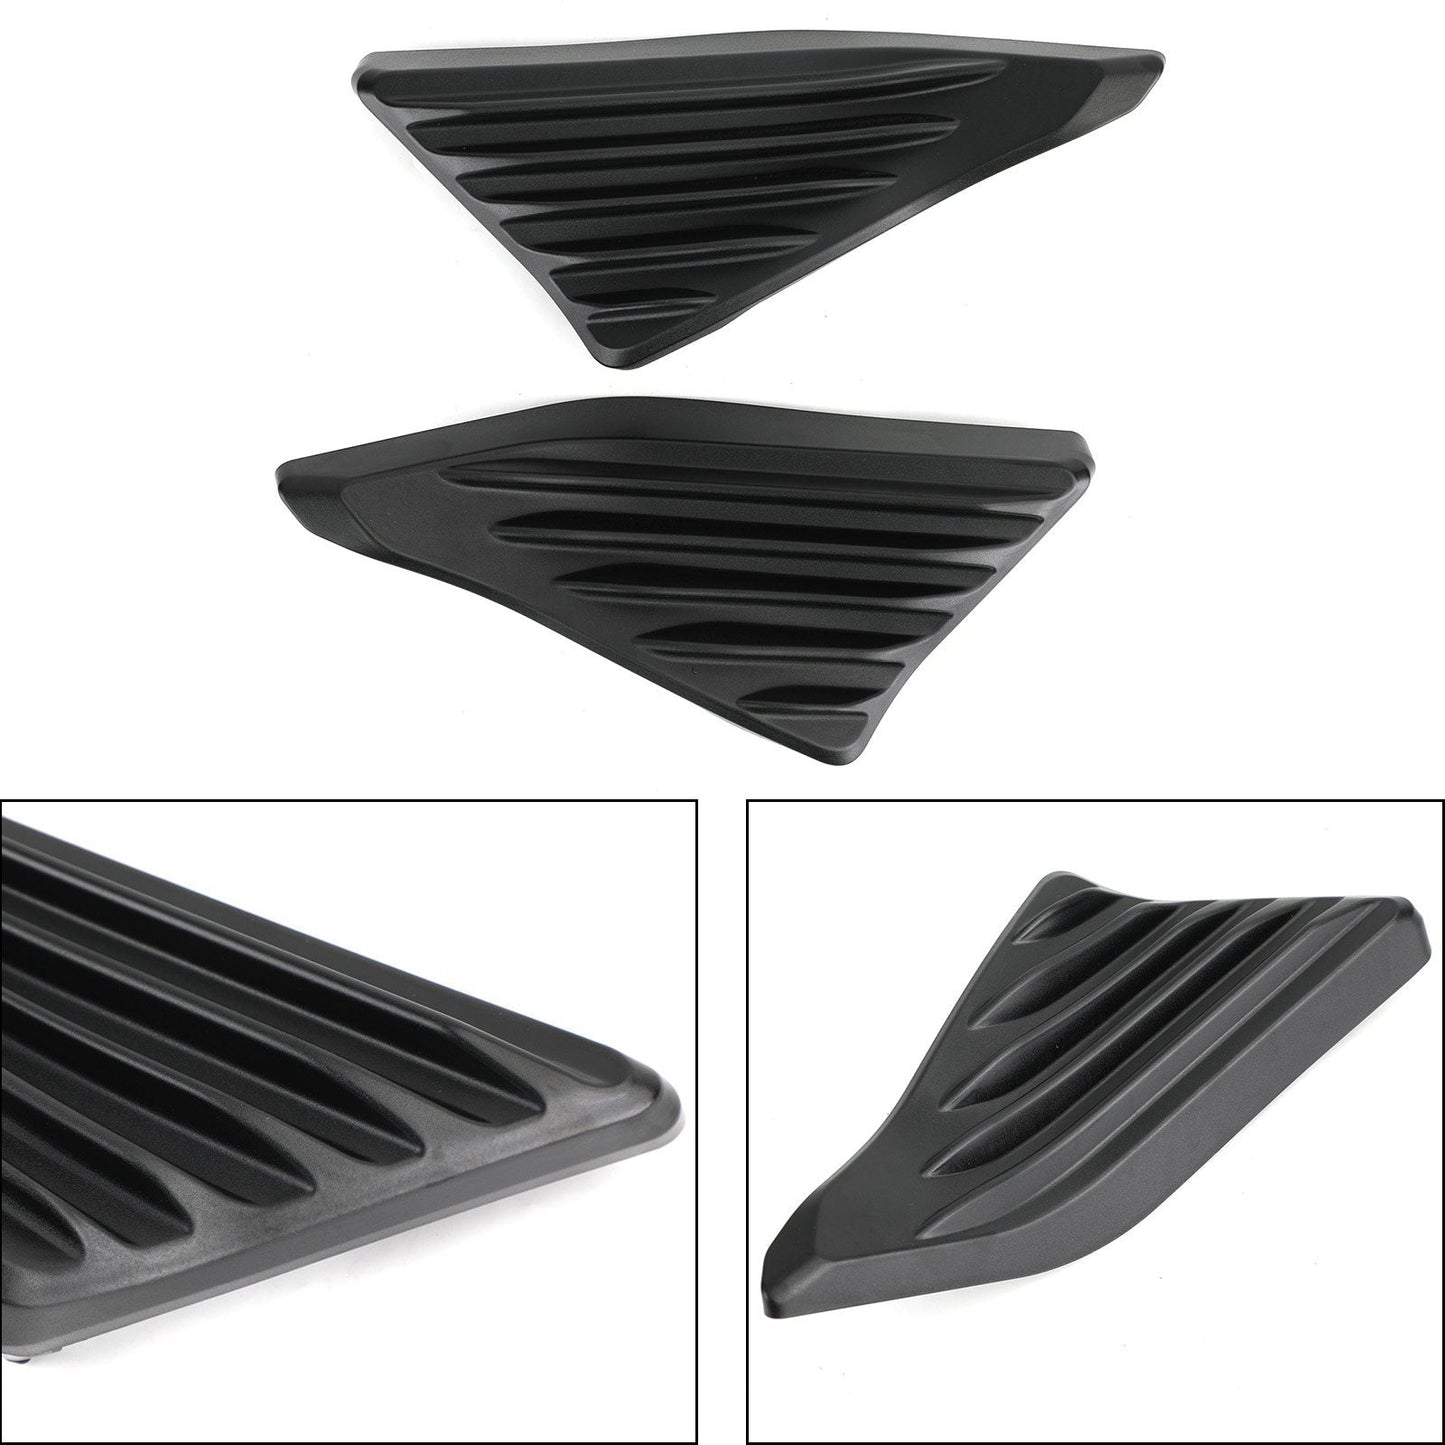 Motorcycle Frame Side Cover Guard Fairing Trim Fit For Honda CMX500 CMX300 2017-2020